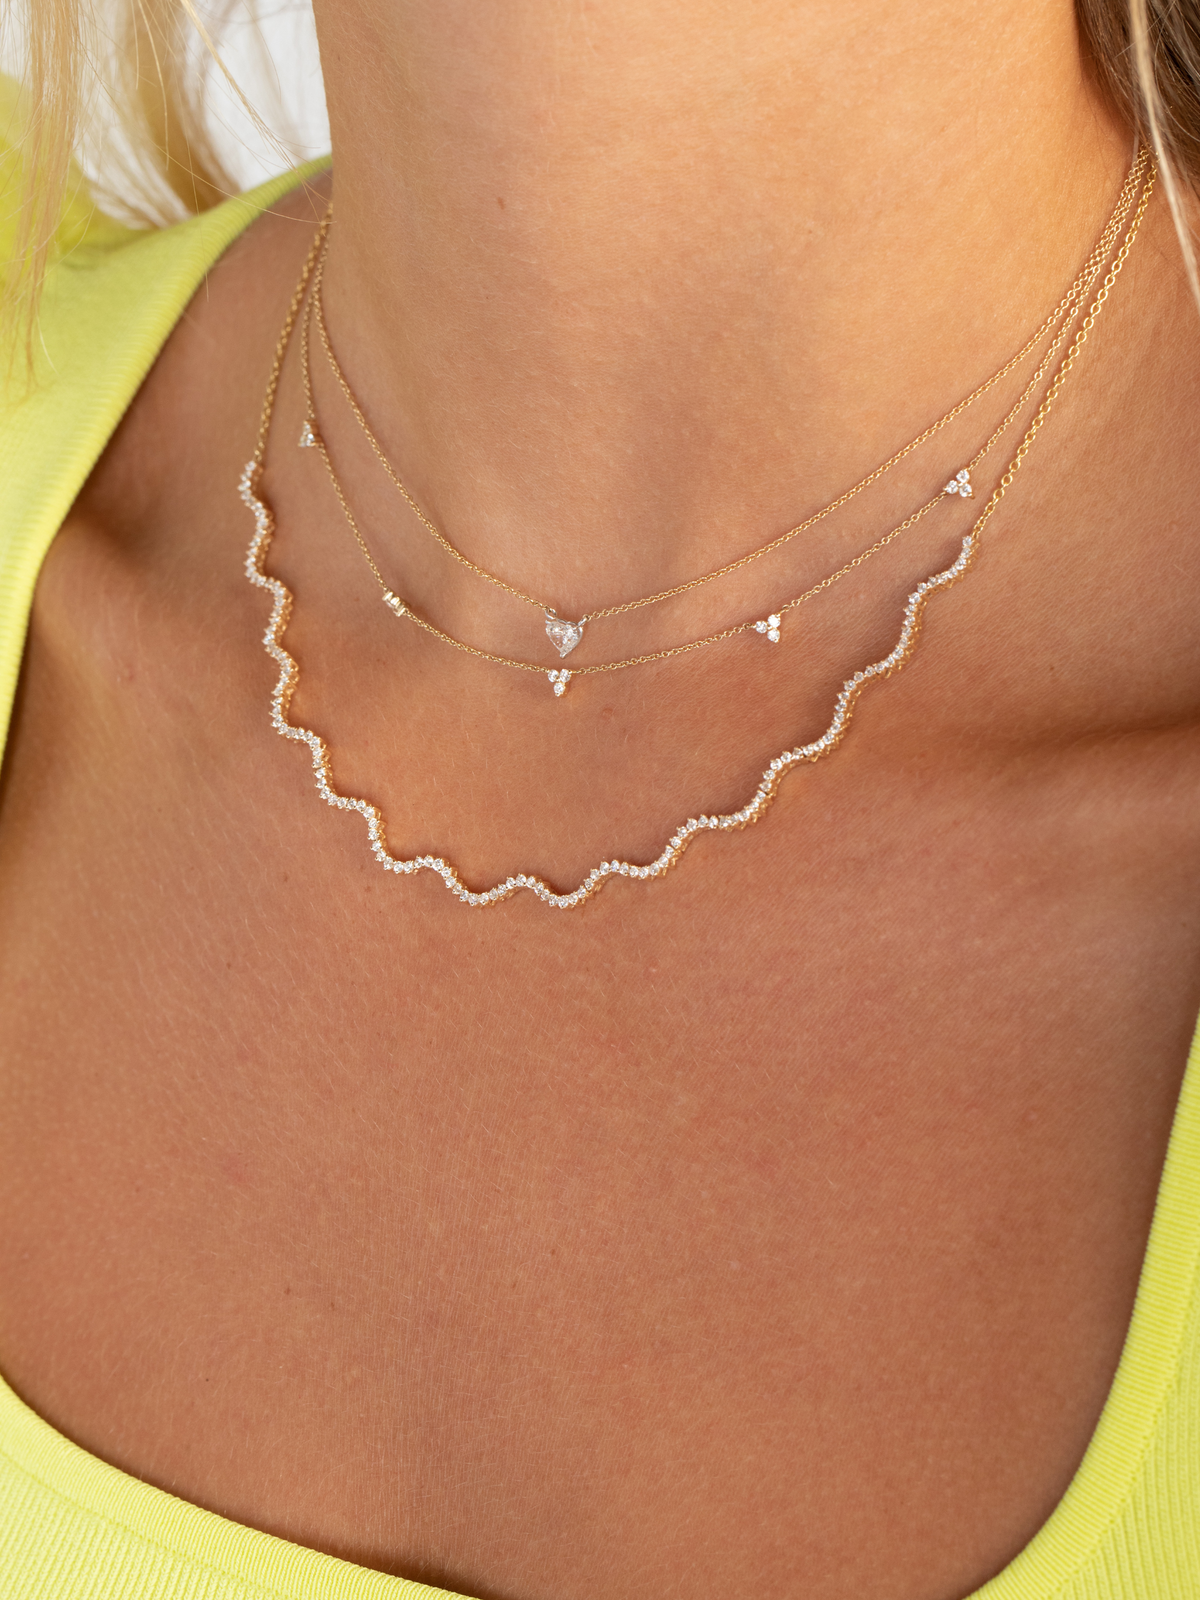 wave shaped diamond tennis necklace layered with a trio diamond layering necklace and a diamond heart necklace